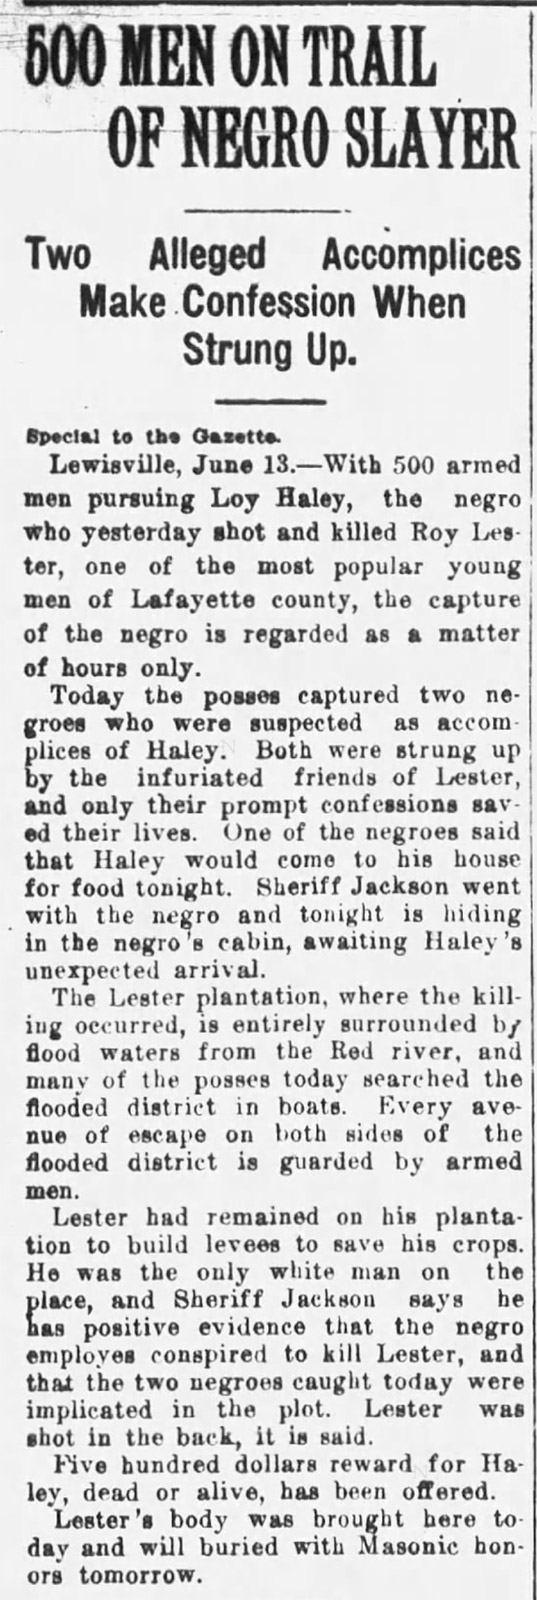 "500 men on trail of Negro slayer" newspaper clipping